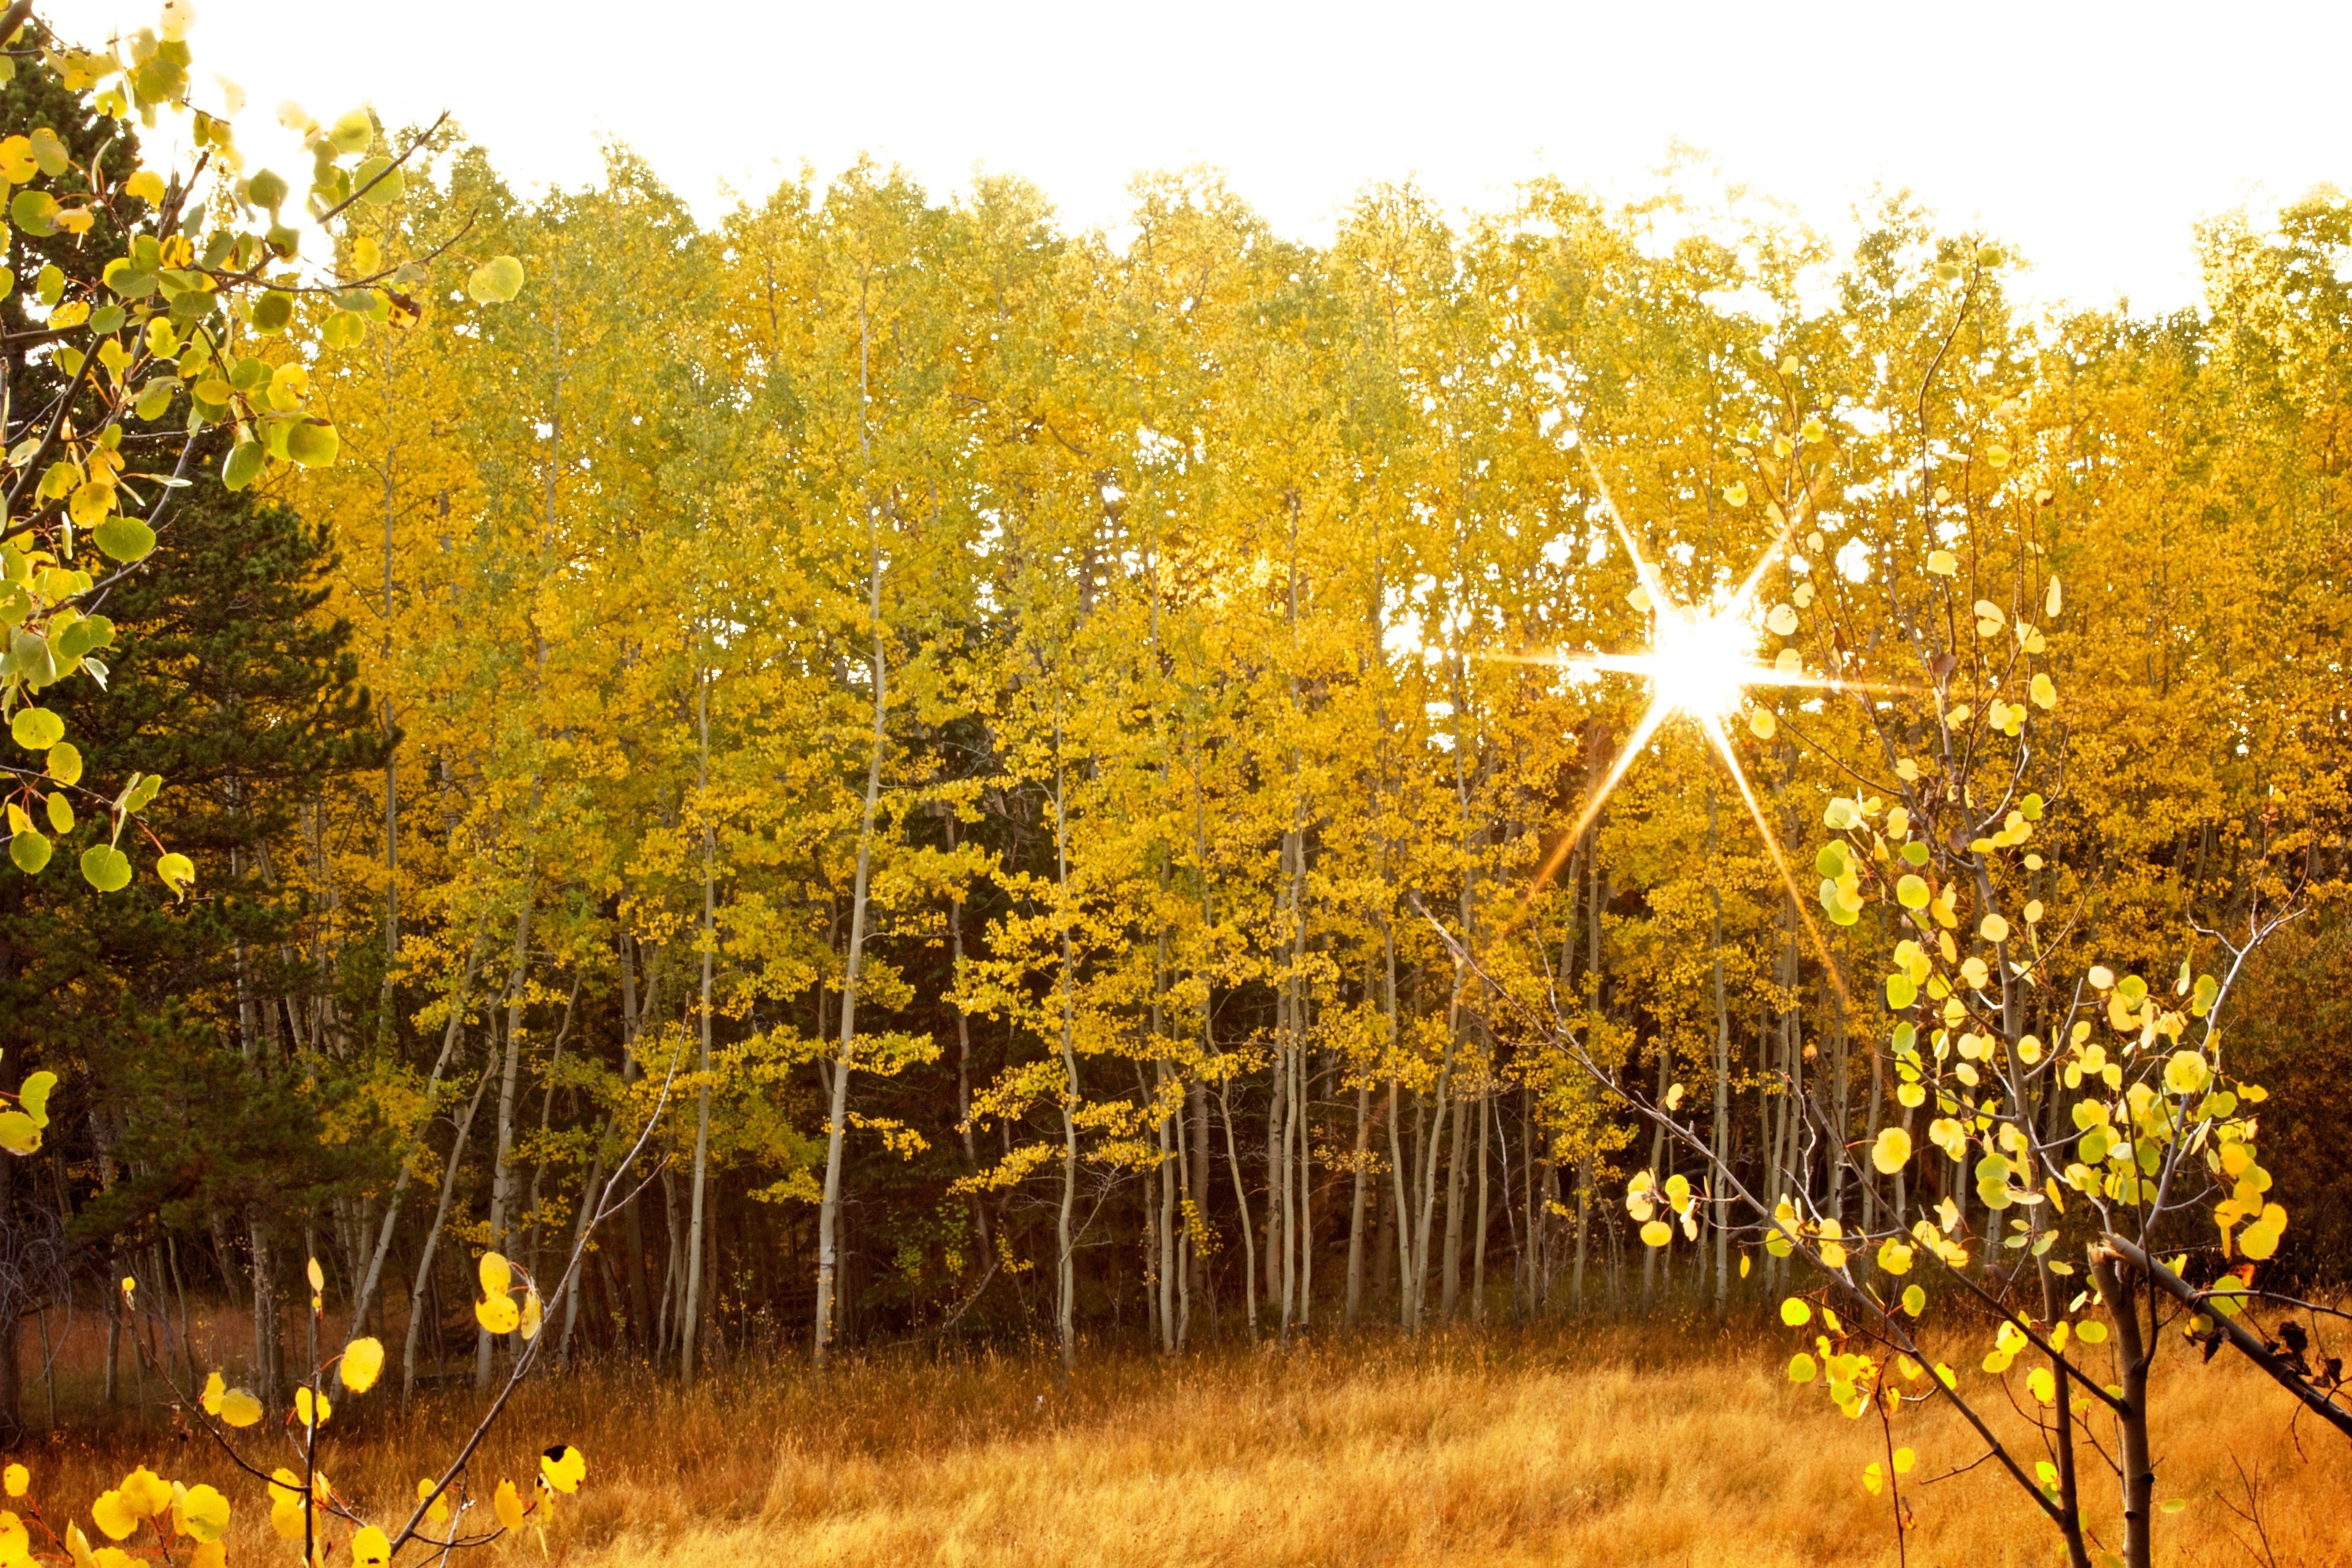 The sun shining through the branches of aspen trees in a grove.